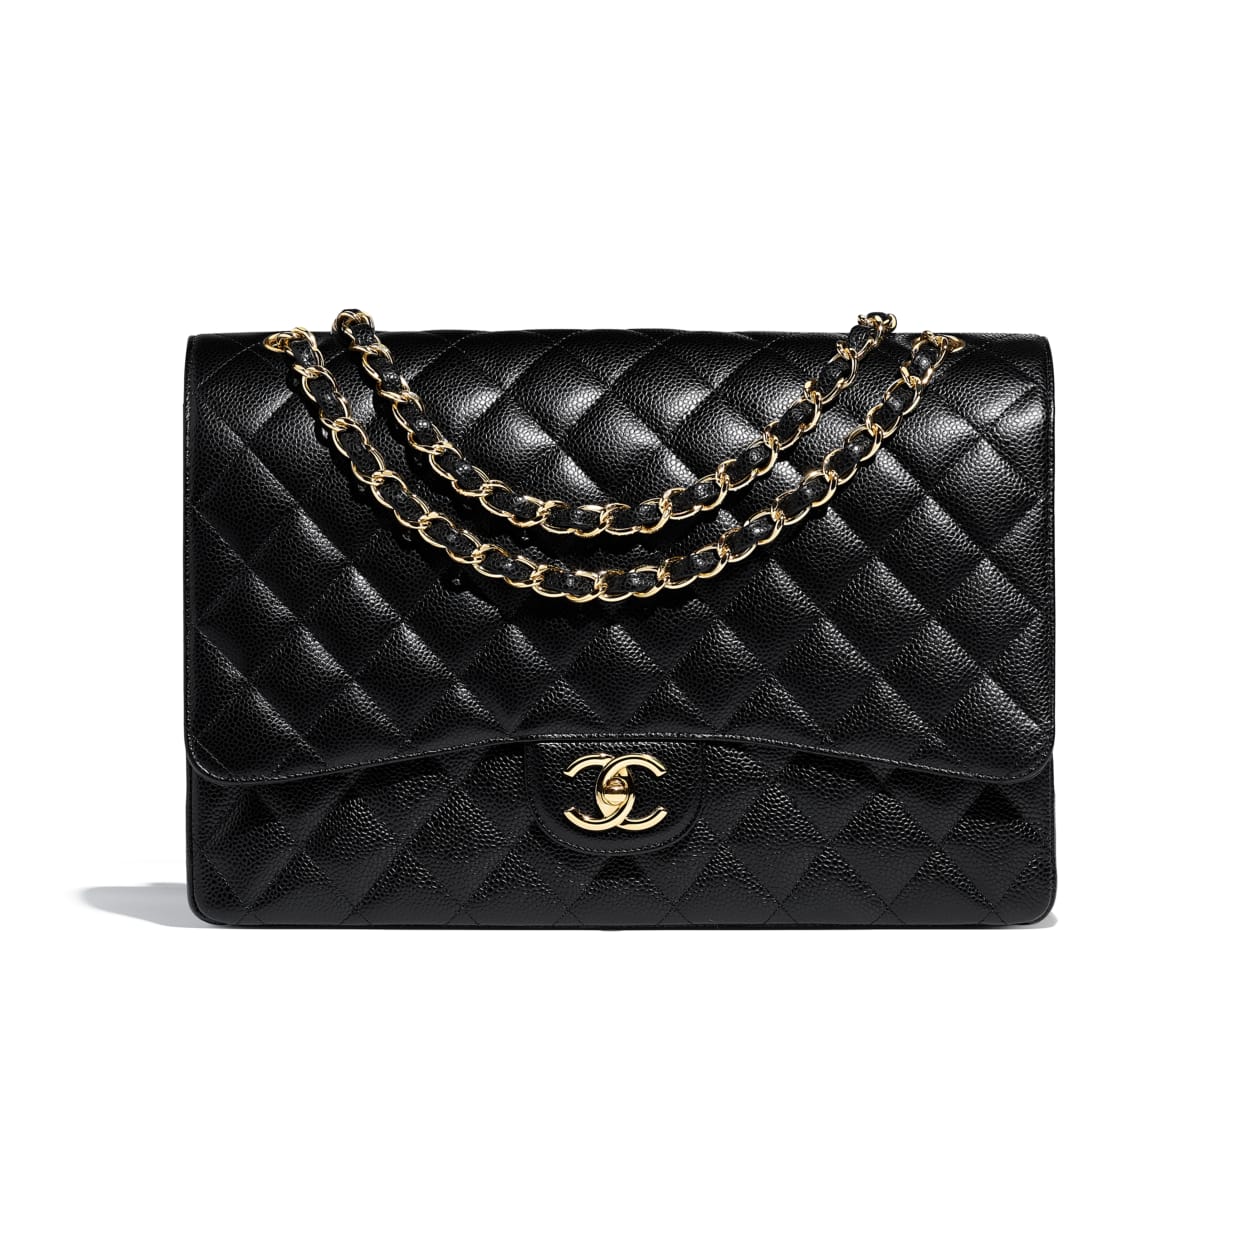 Chanel Us Bag Prices Have Increased Effective January 15 21 Spotted Fashion